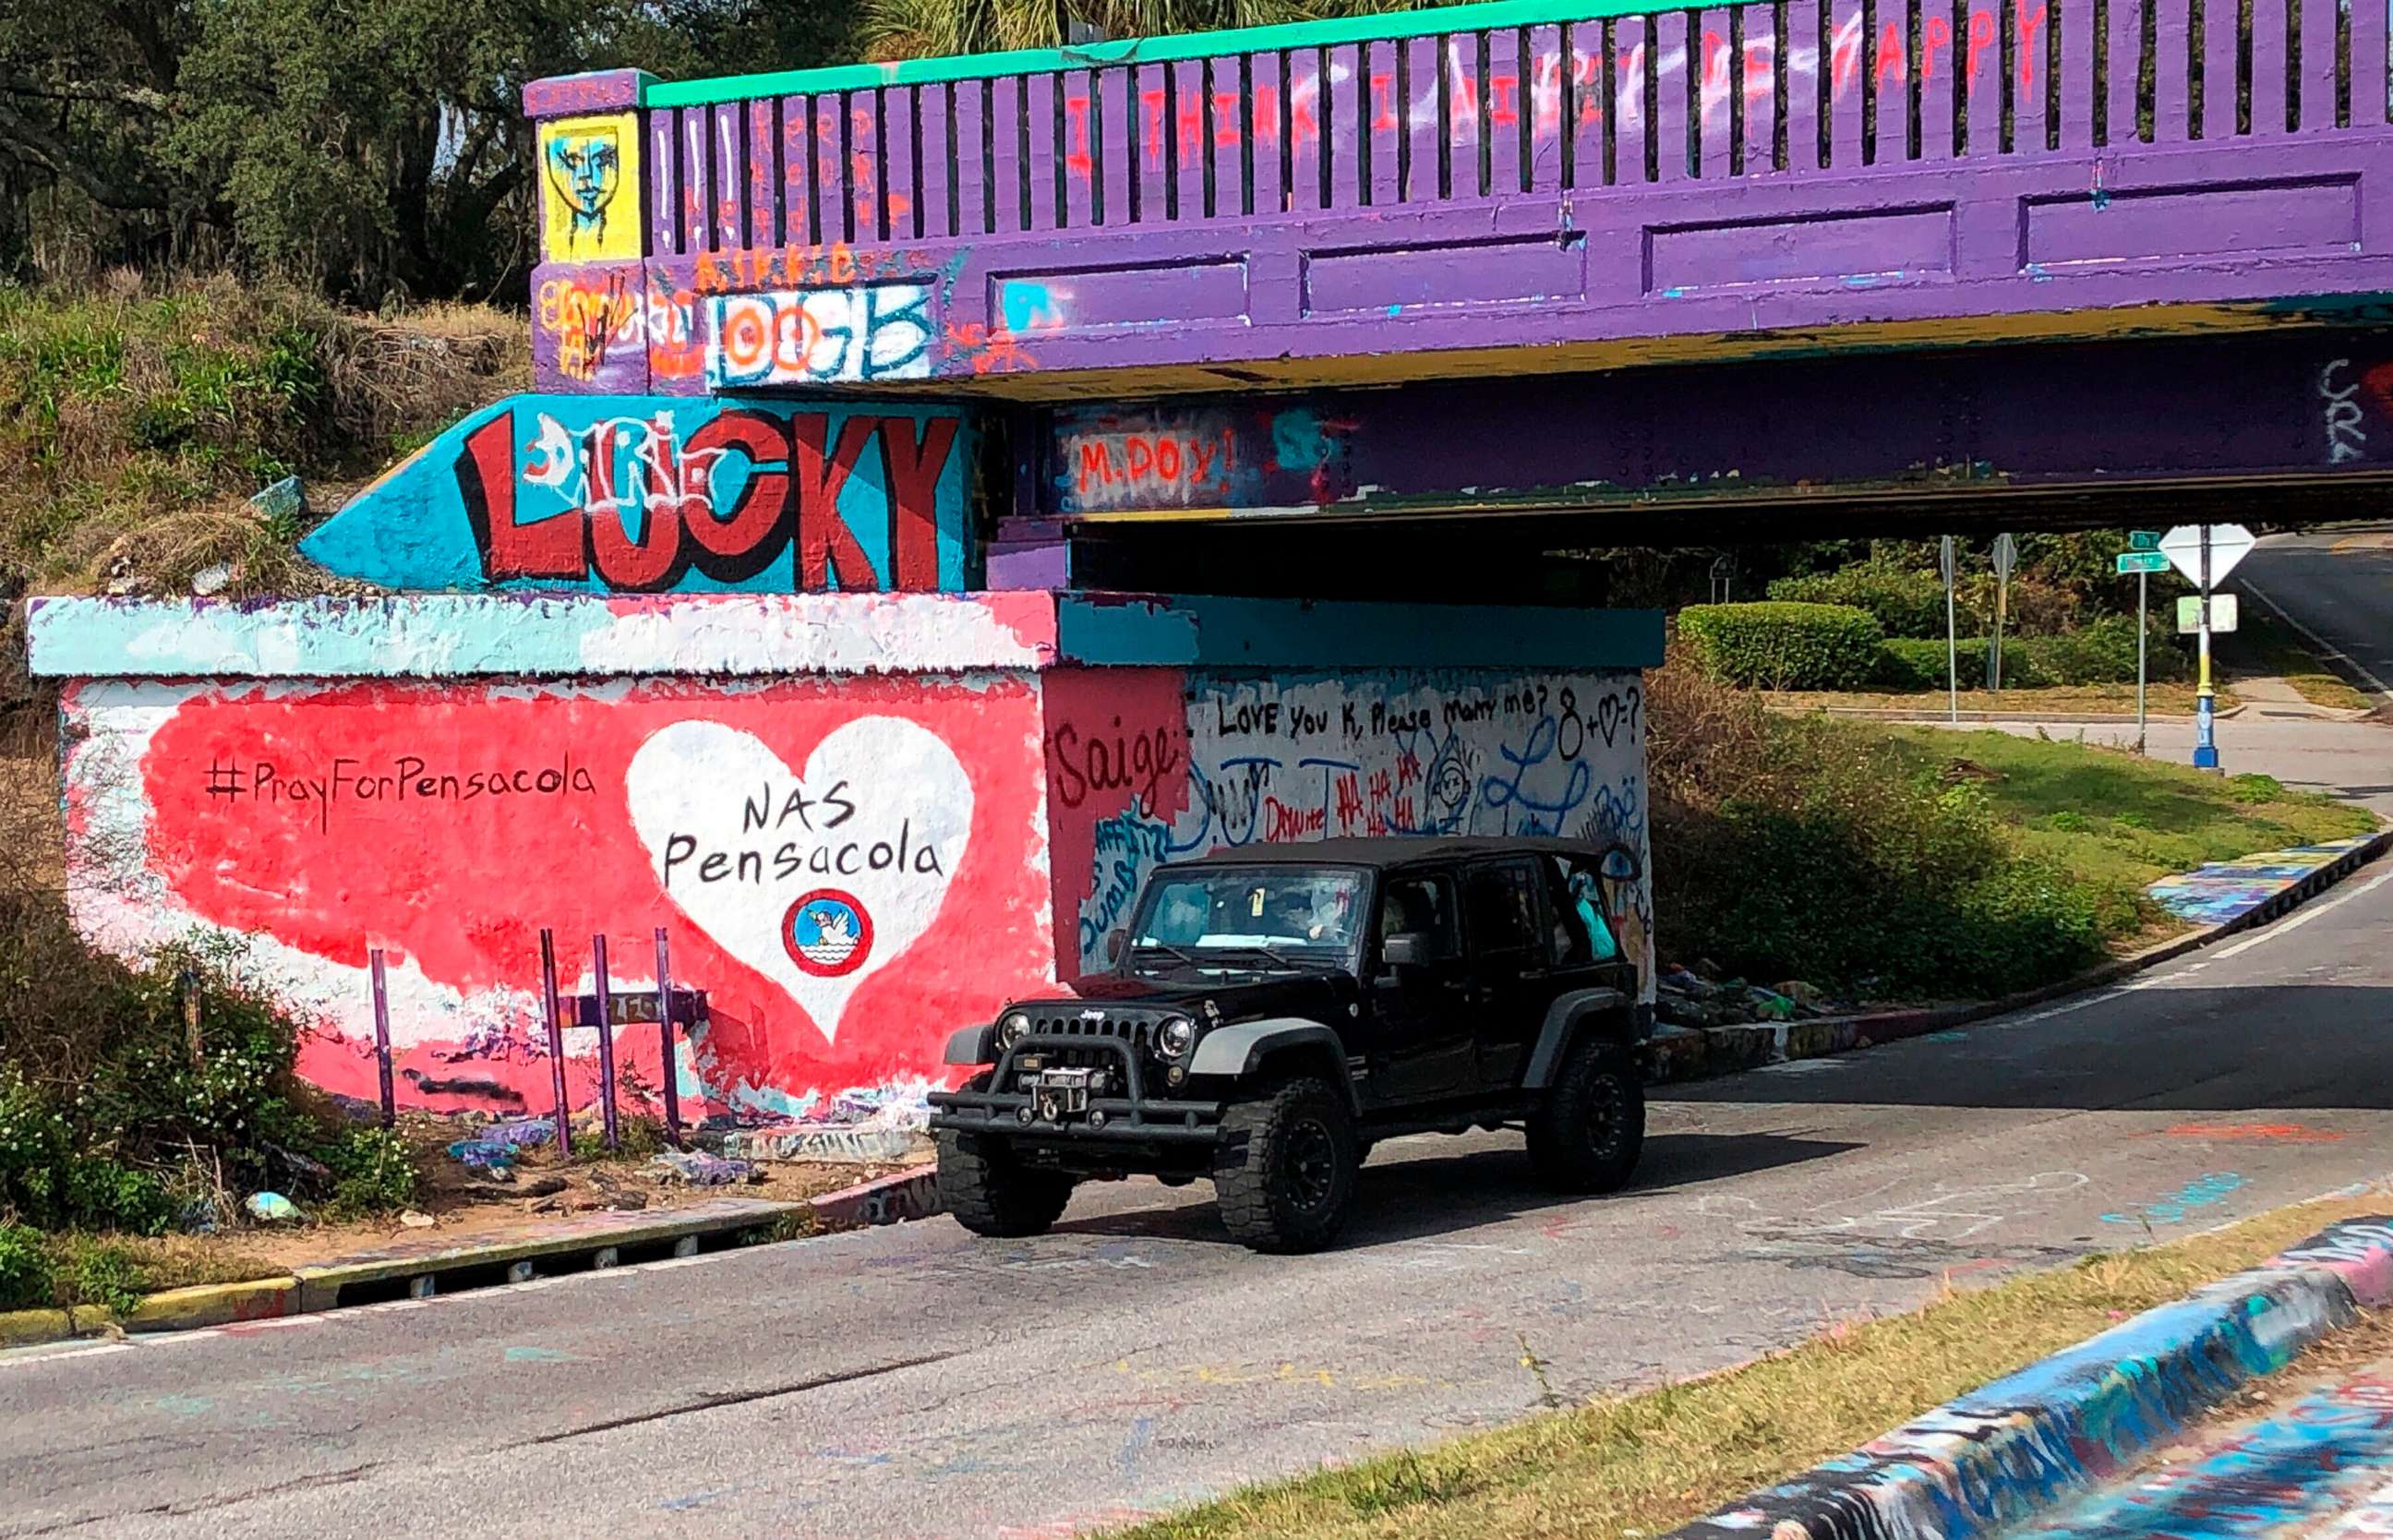 PHOTO: A vehicle drives by a tribute to victims of the Naval Air Station Pensacola that was freshly painted on what is known as Graffiti Bridge in downtown Pensacola, Fla., on Saturday, Dec. 7, 2019.